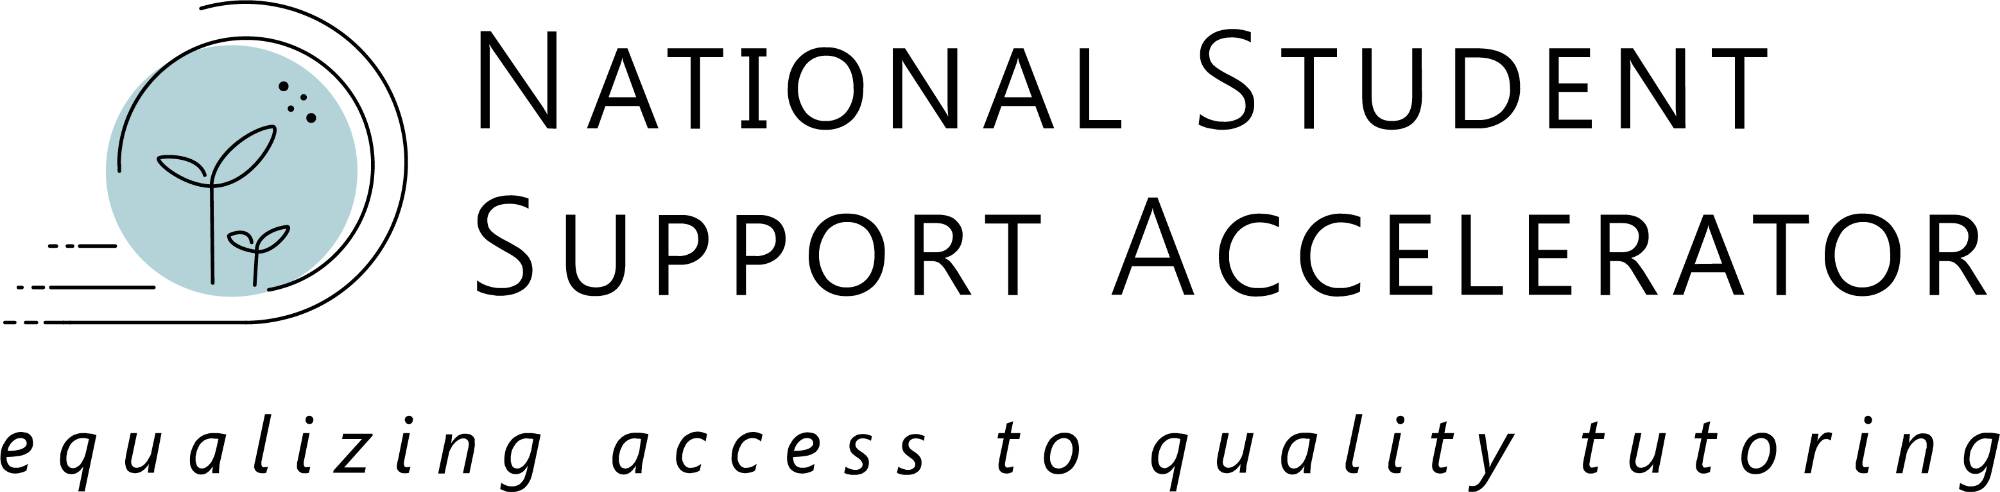 National Student Support Accelerator